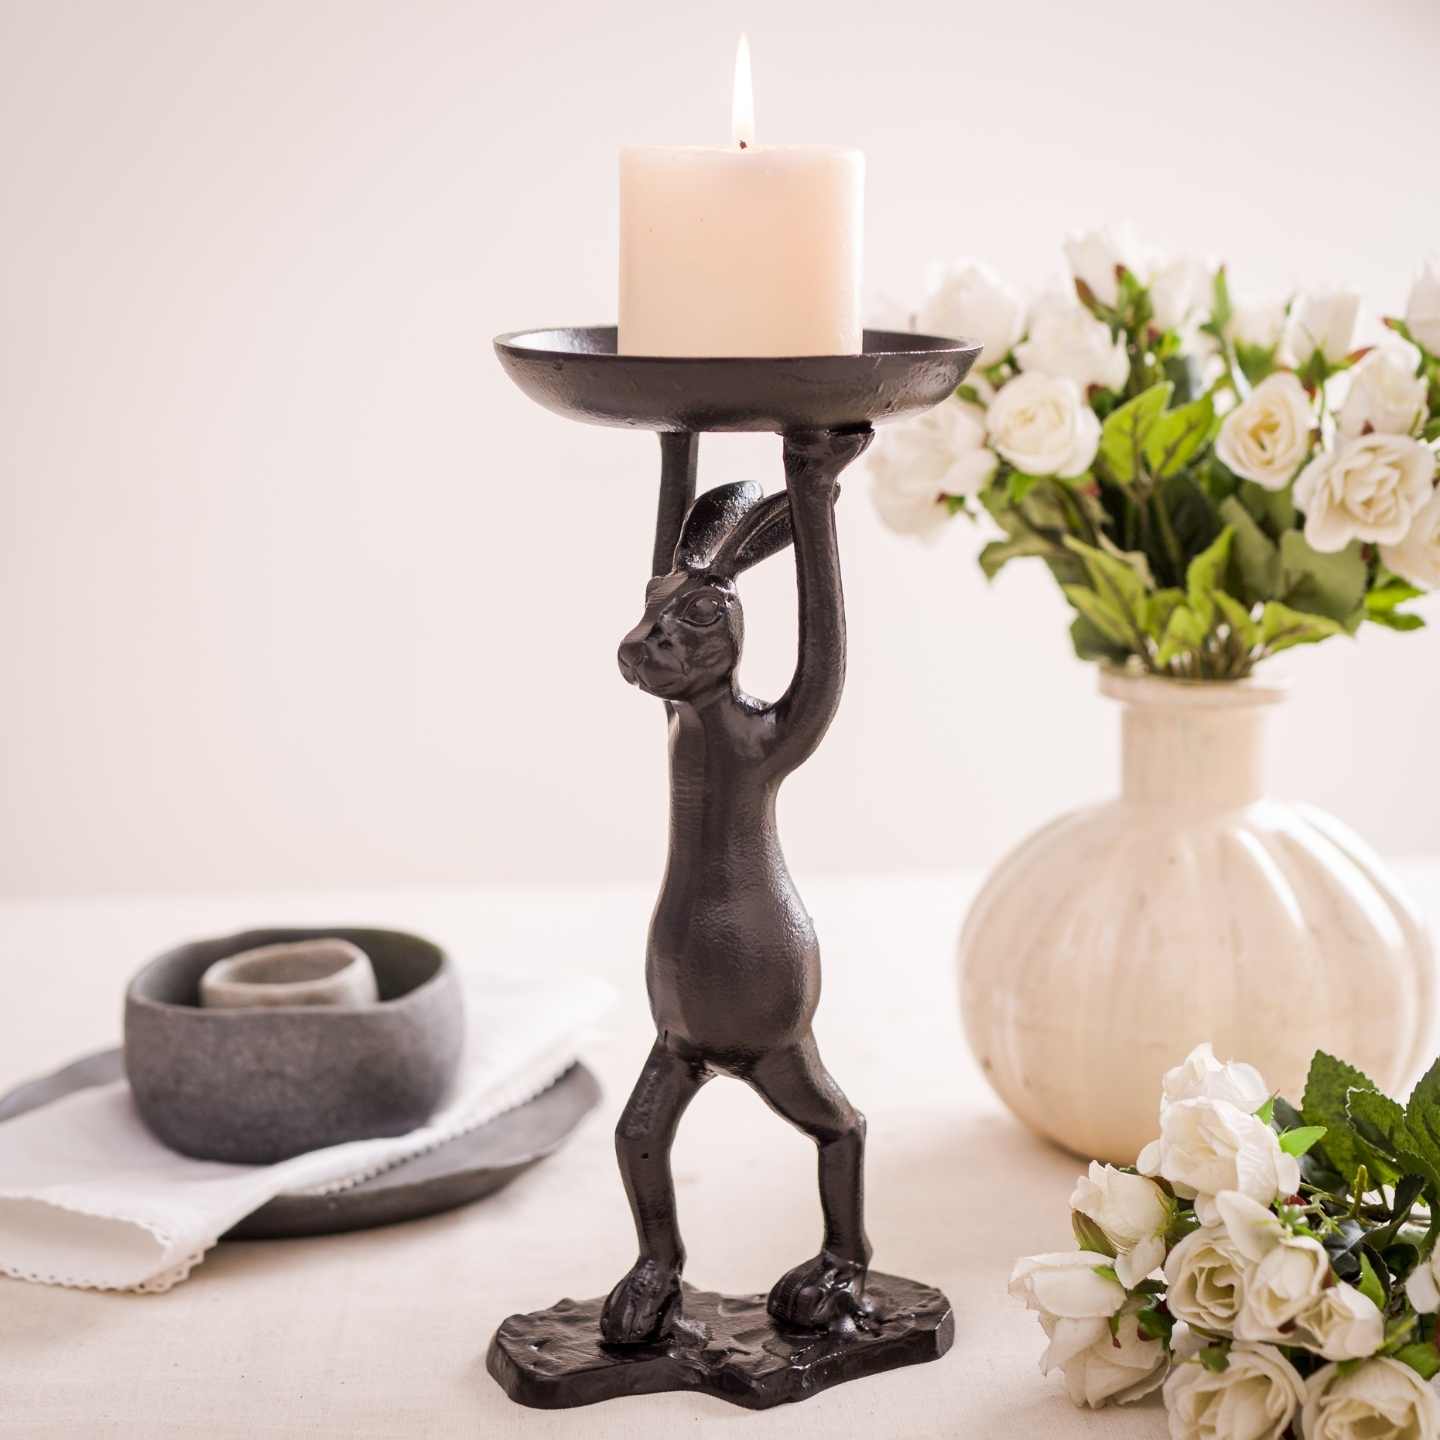 The Strong Bunny Pillar Candle holder